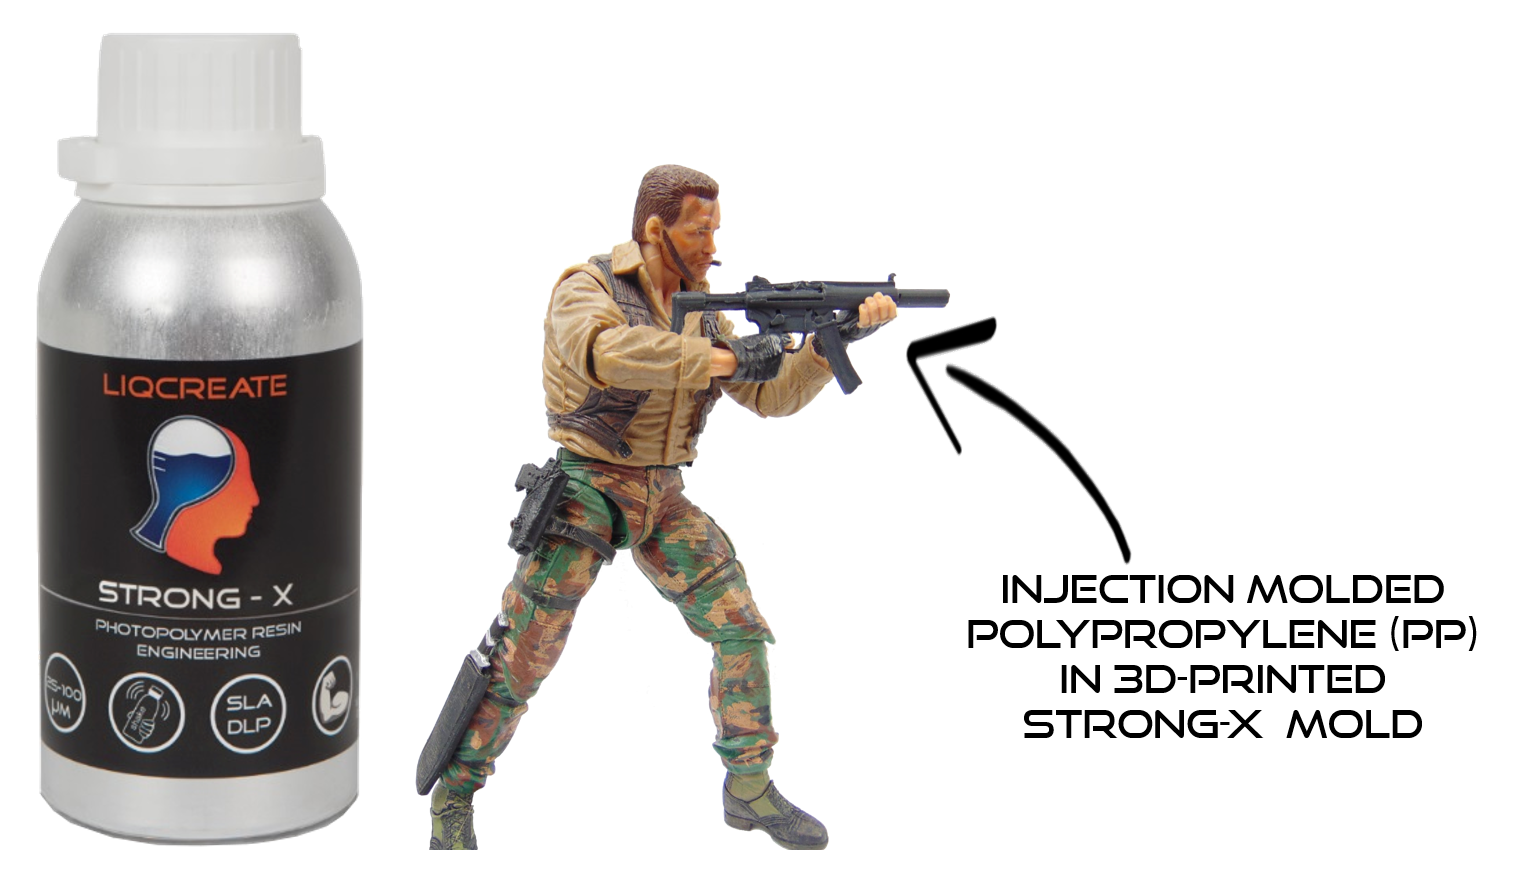 Injection molded PP in resin 3Dprinted mold from Liqcreate Strong-x resin on anycubic photon resin 3d-printer toy manufacturer arnold arnold schwarzenegger terminator i'll be back